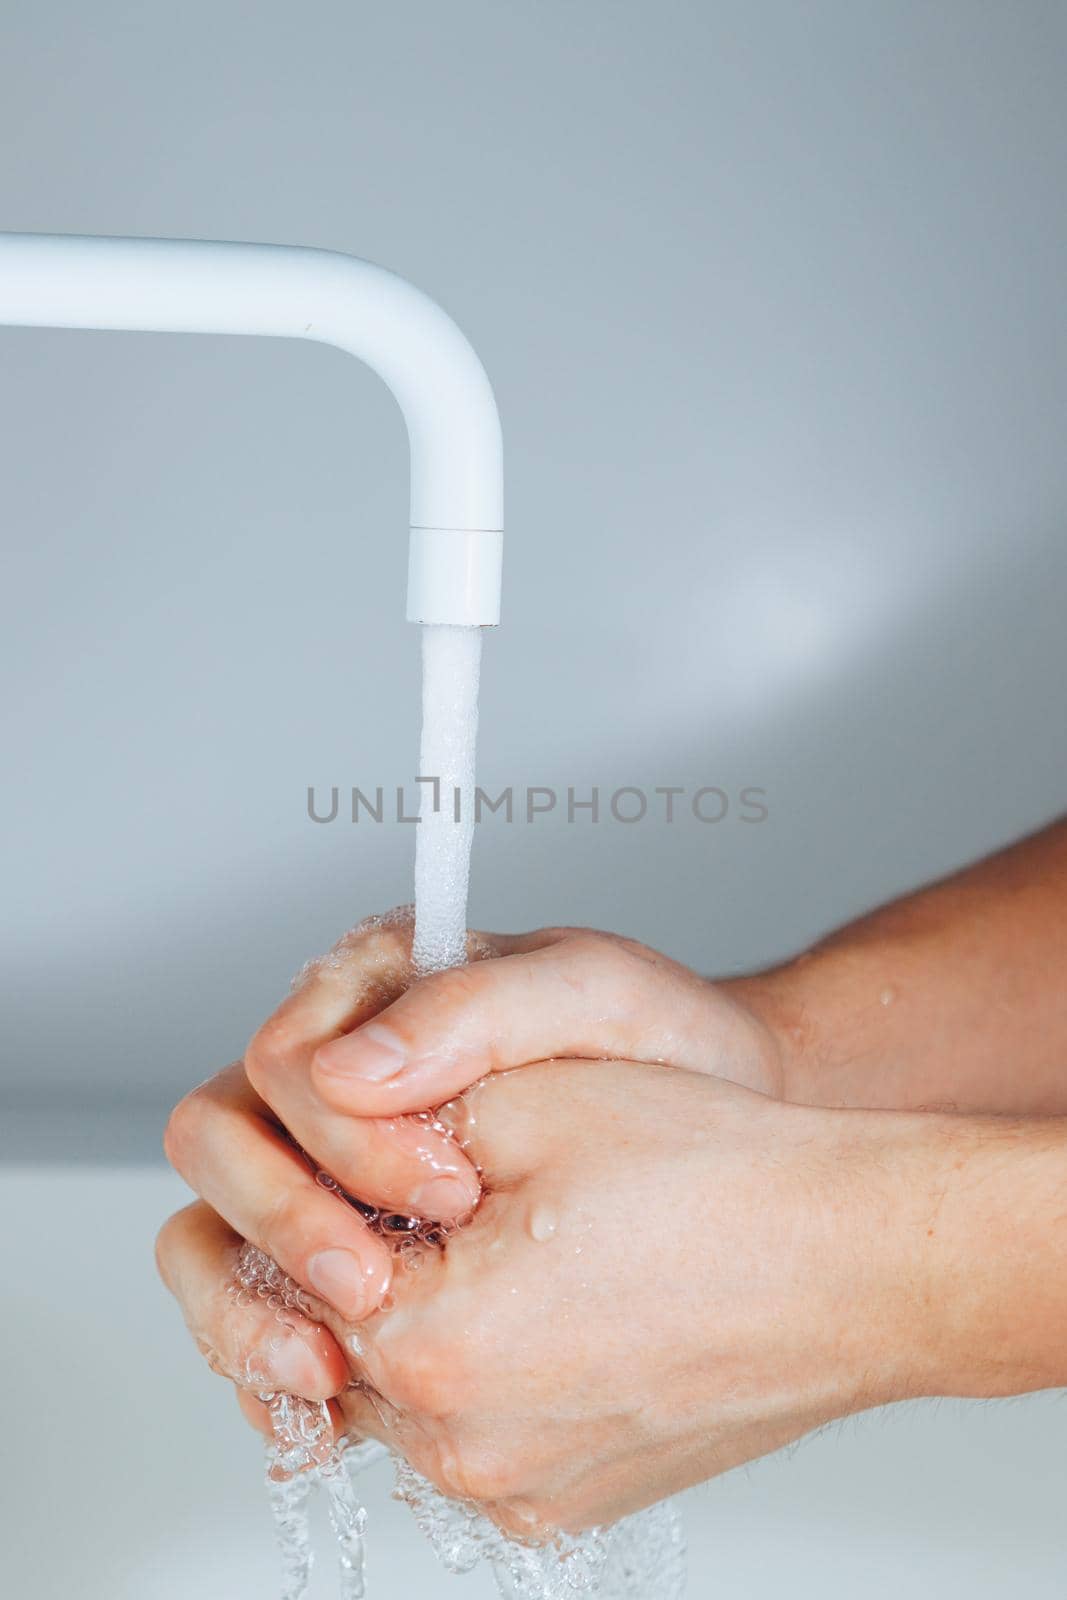 hands washing under the faucet in a bathroom by nikkytok